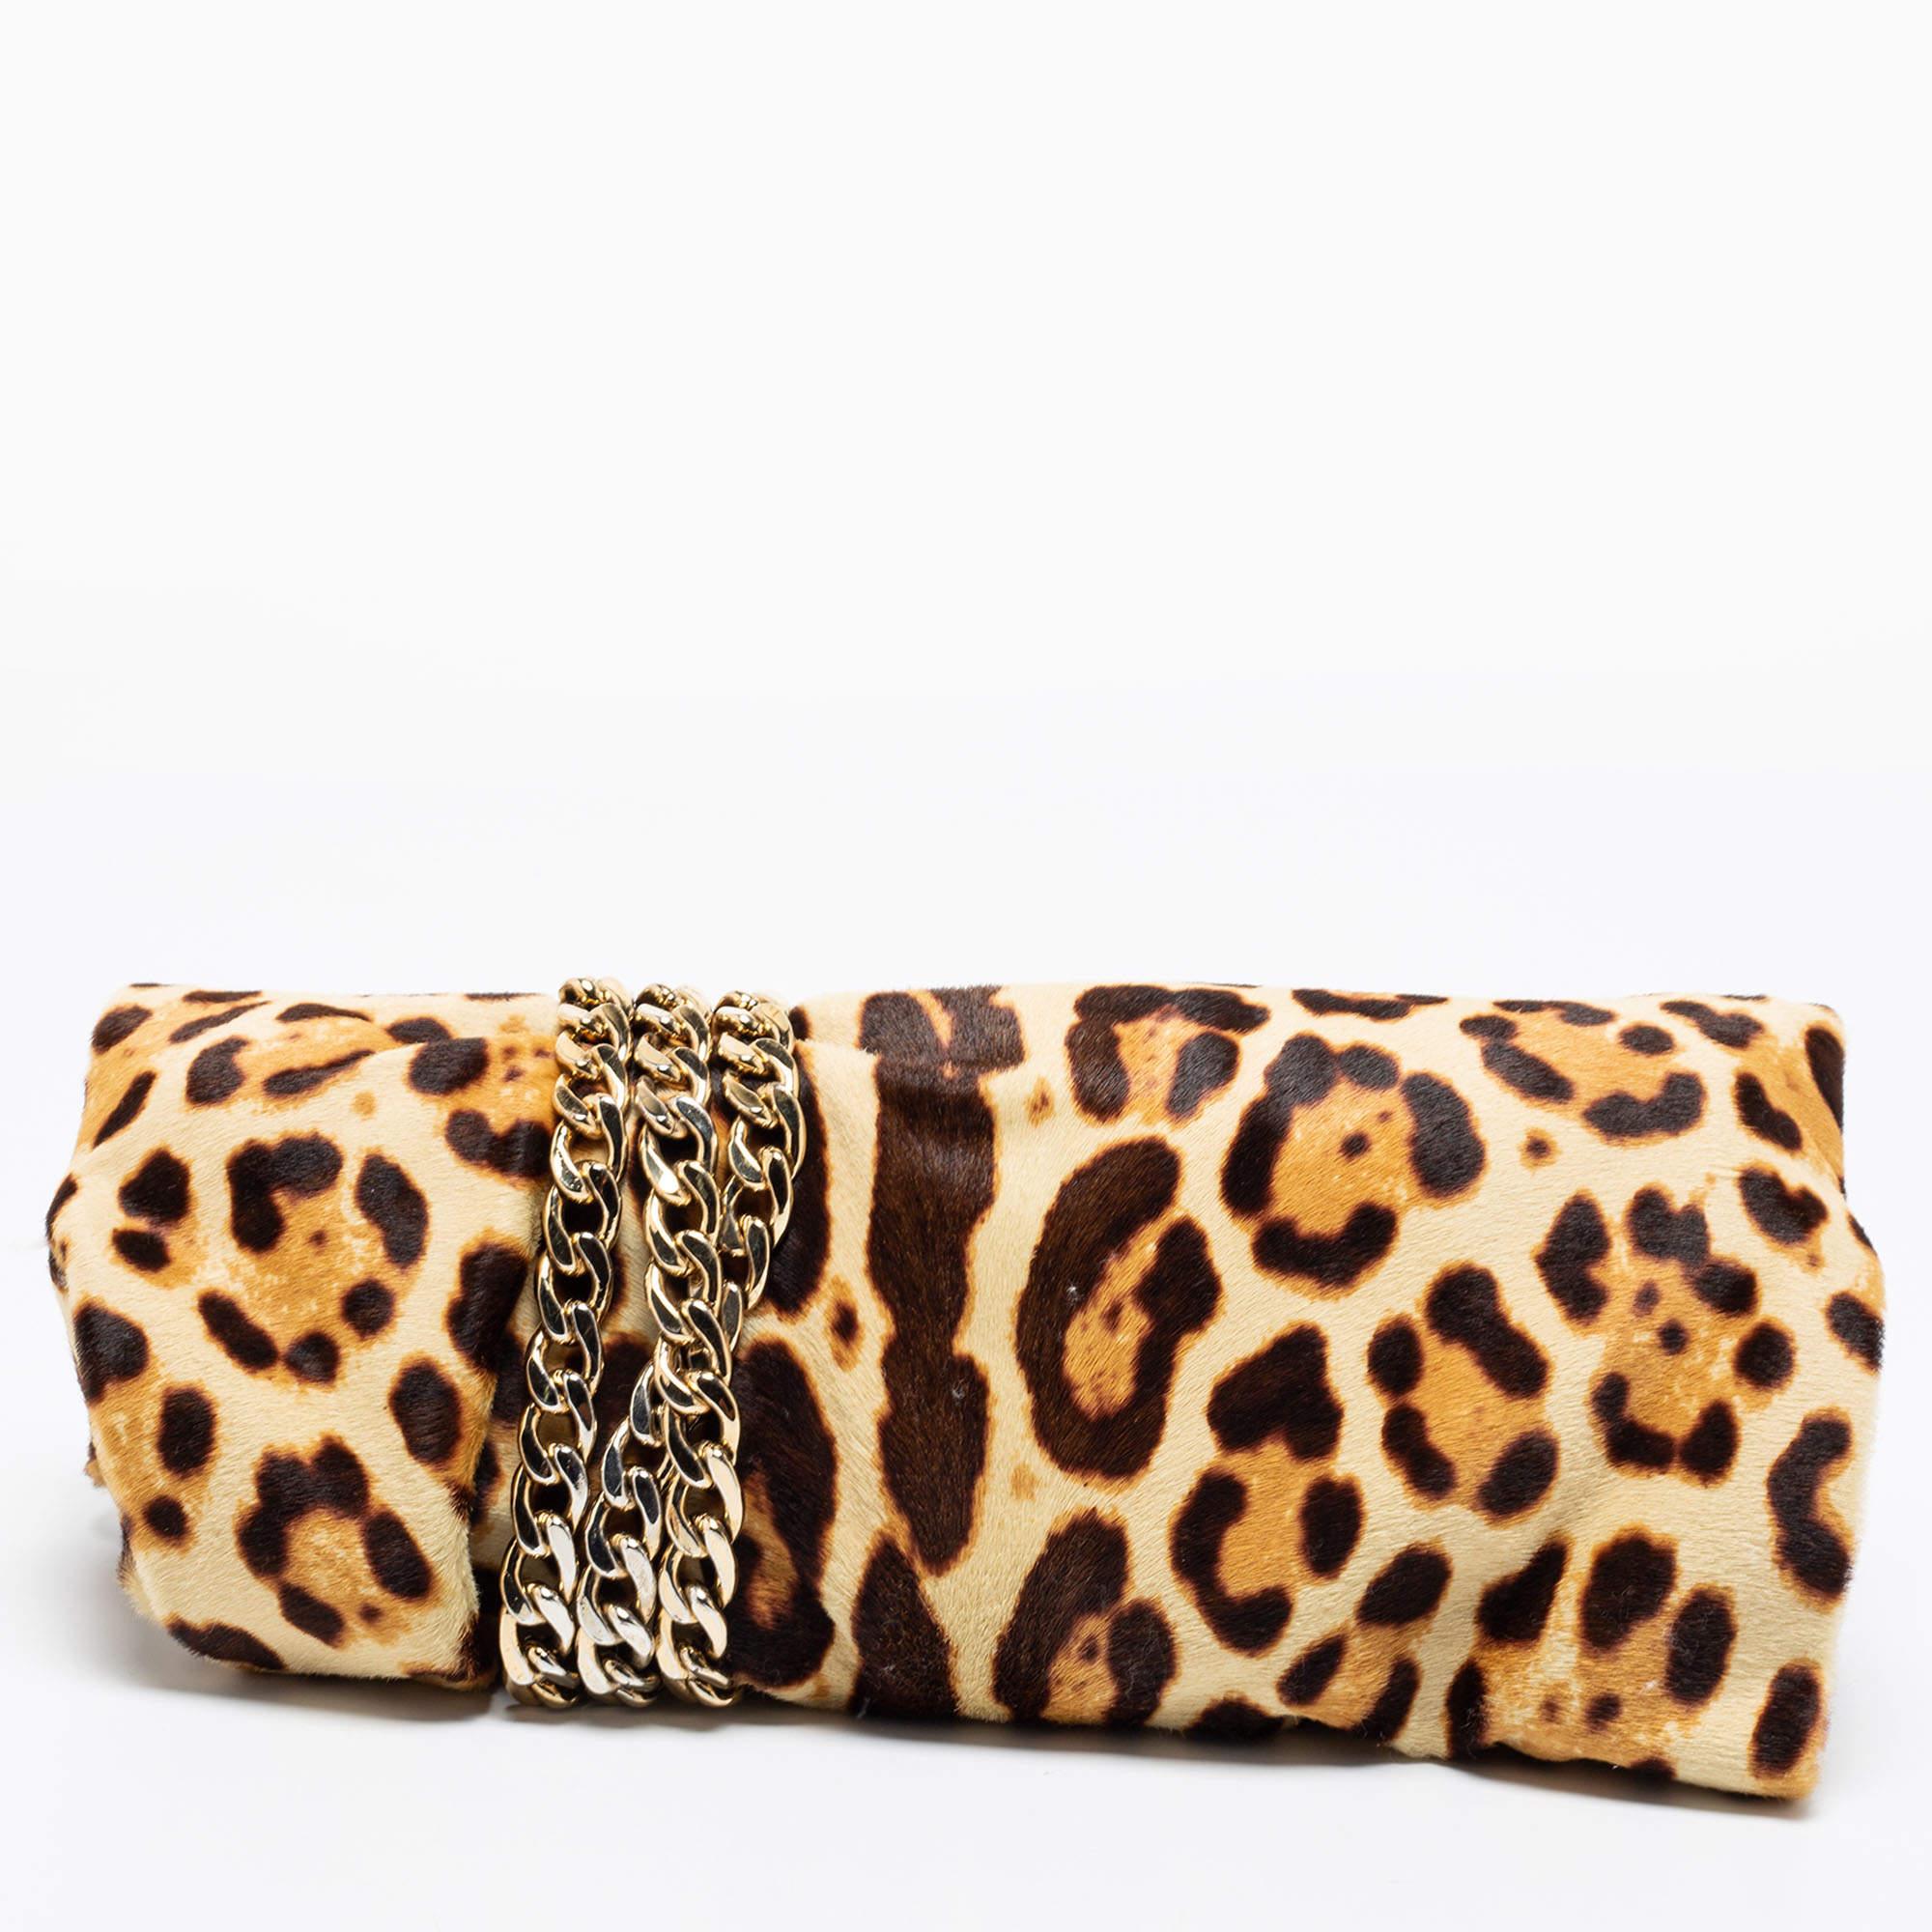 Accessorize this Jimmy Choo clutch with your outfit for your next evening party. Exquisitely crafted from leopard-printed calf hair, its silhouette is enhanced with a gold-tone chain link wound around it to end with a padlock. The Alcantara-lined